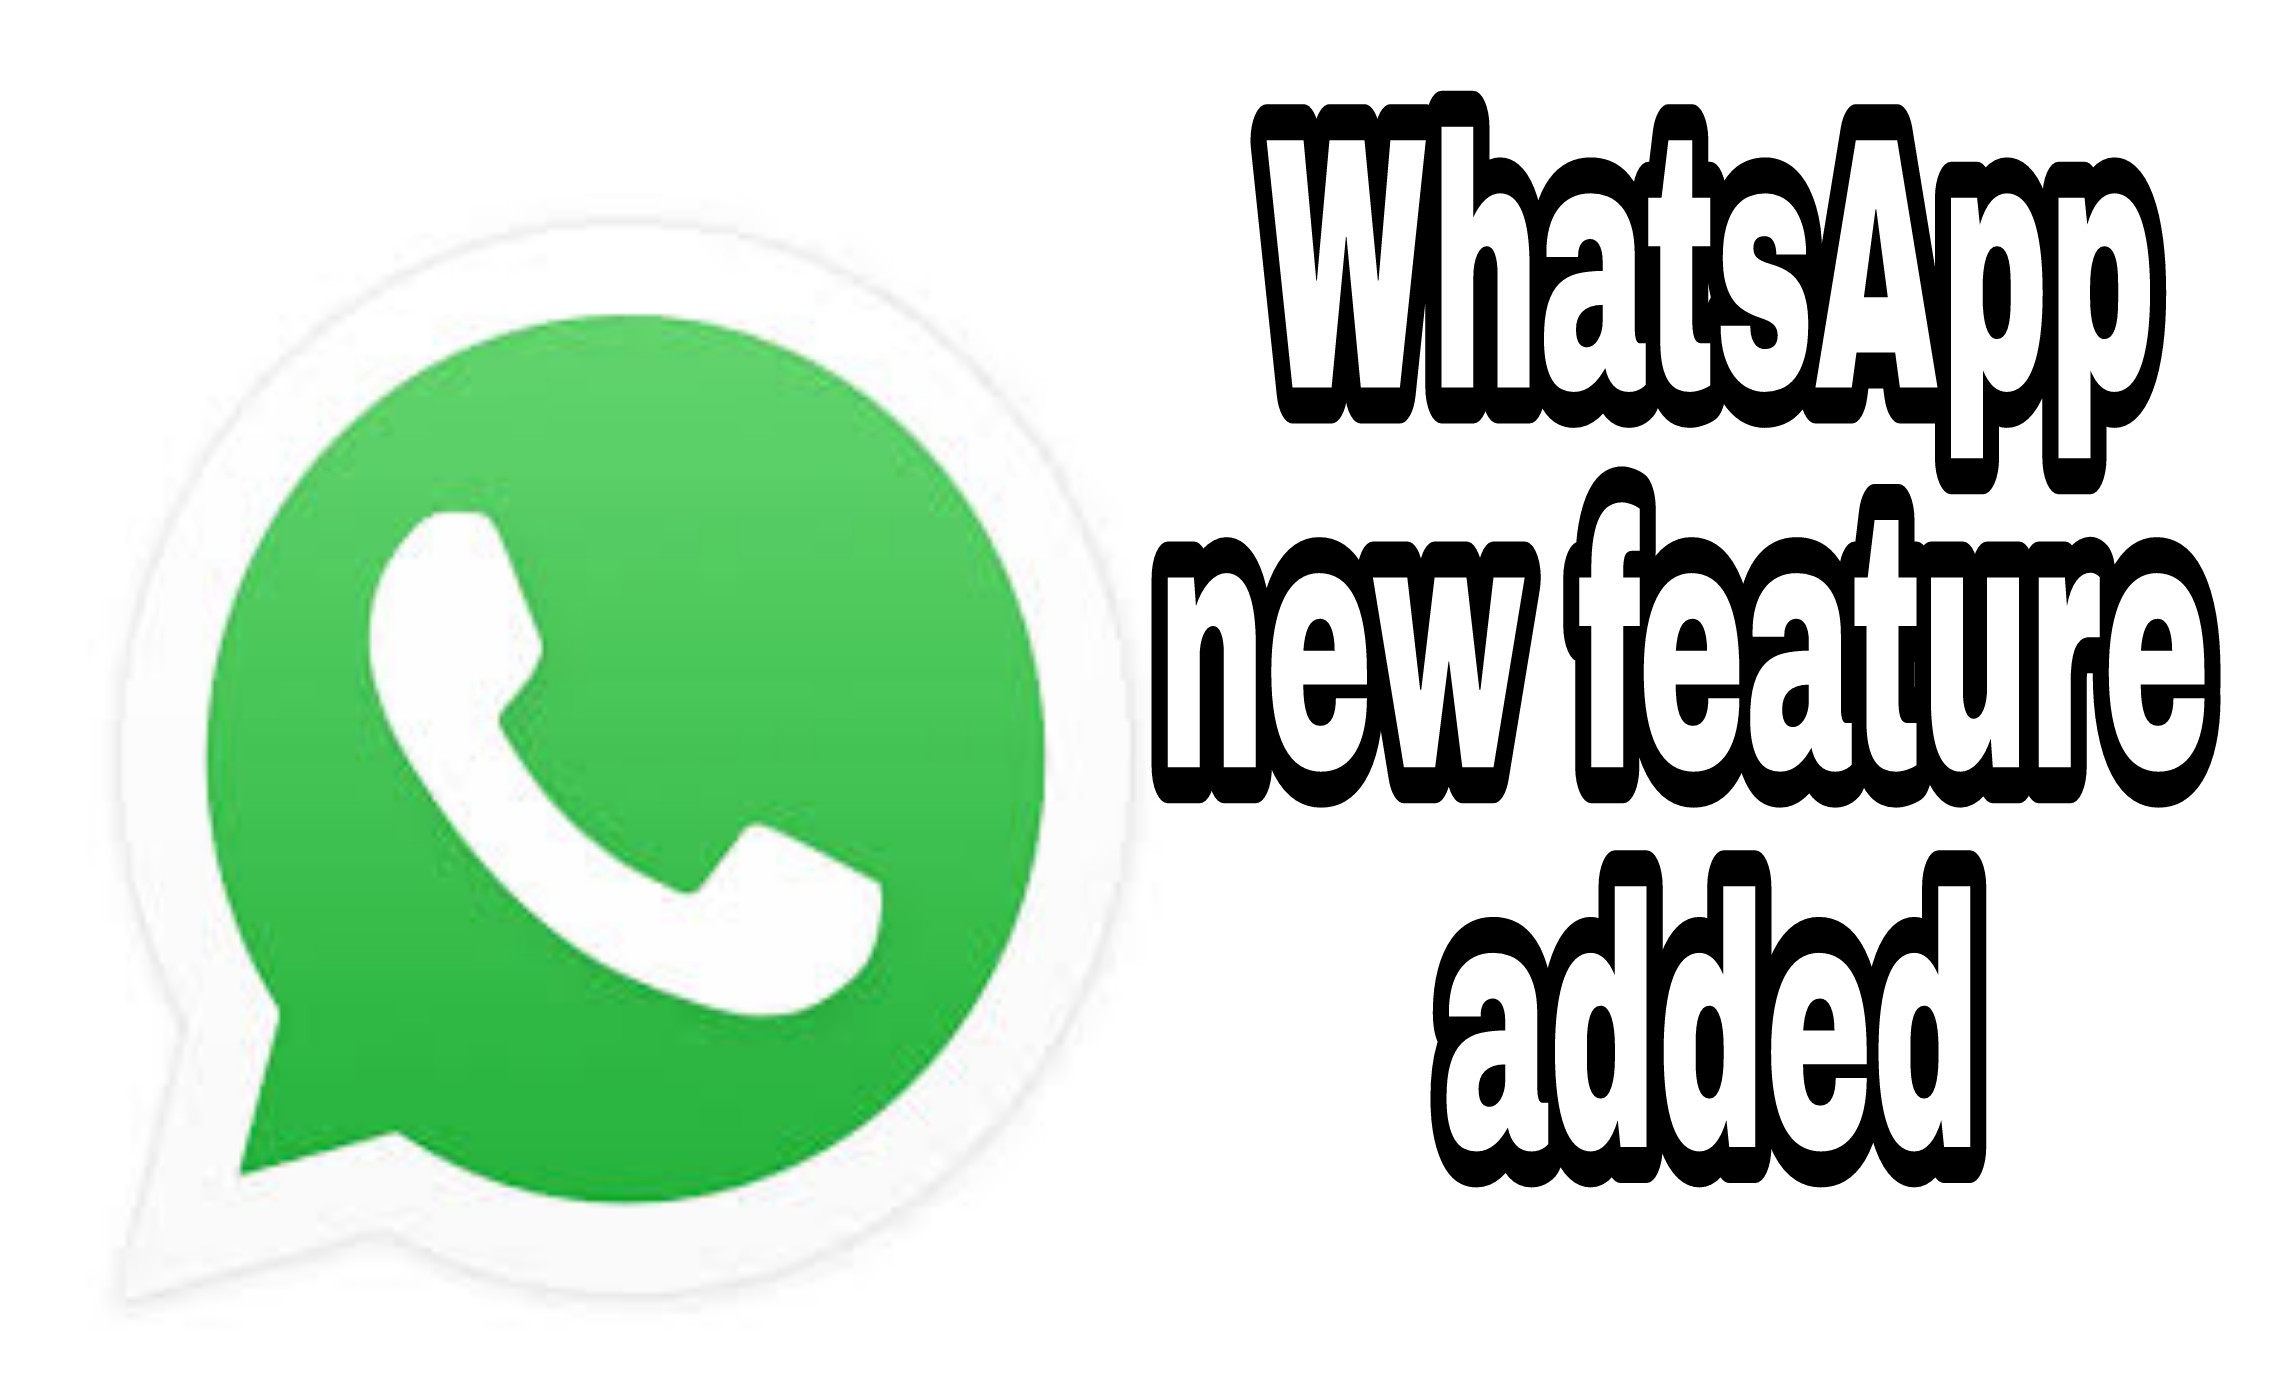 Whatsapp has removed one feature  and add a new feature